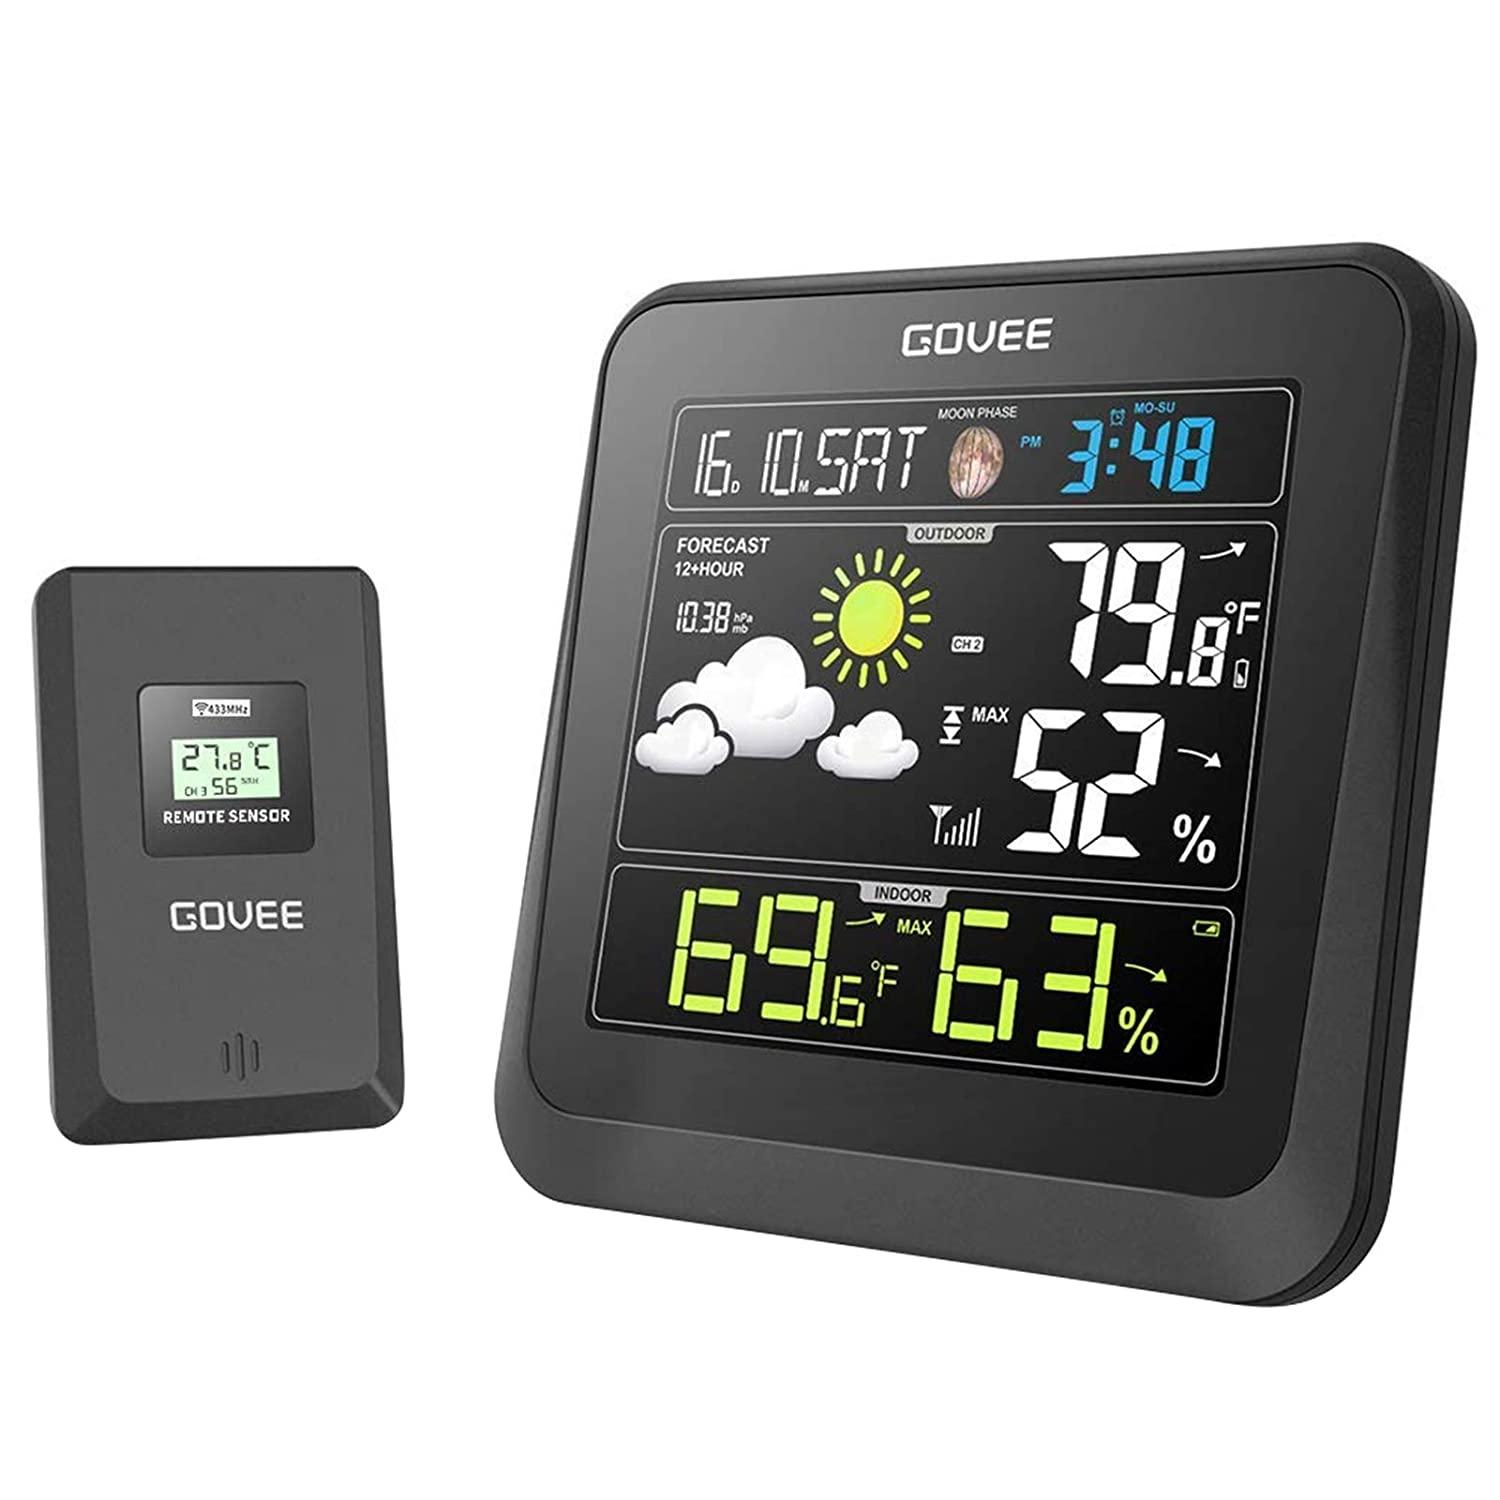 Govee Wireless Weather Station with Outdoor Sensor for $21.99 Shipped